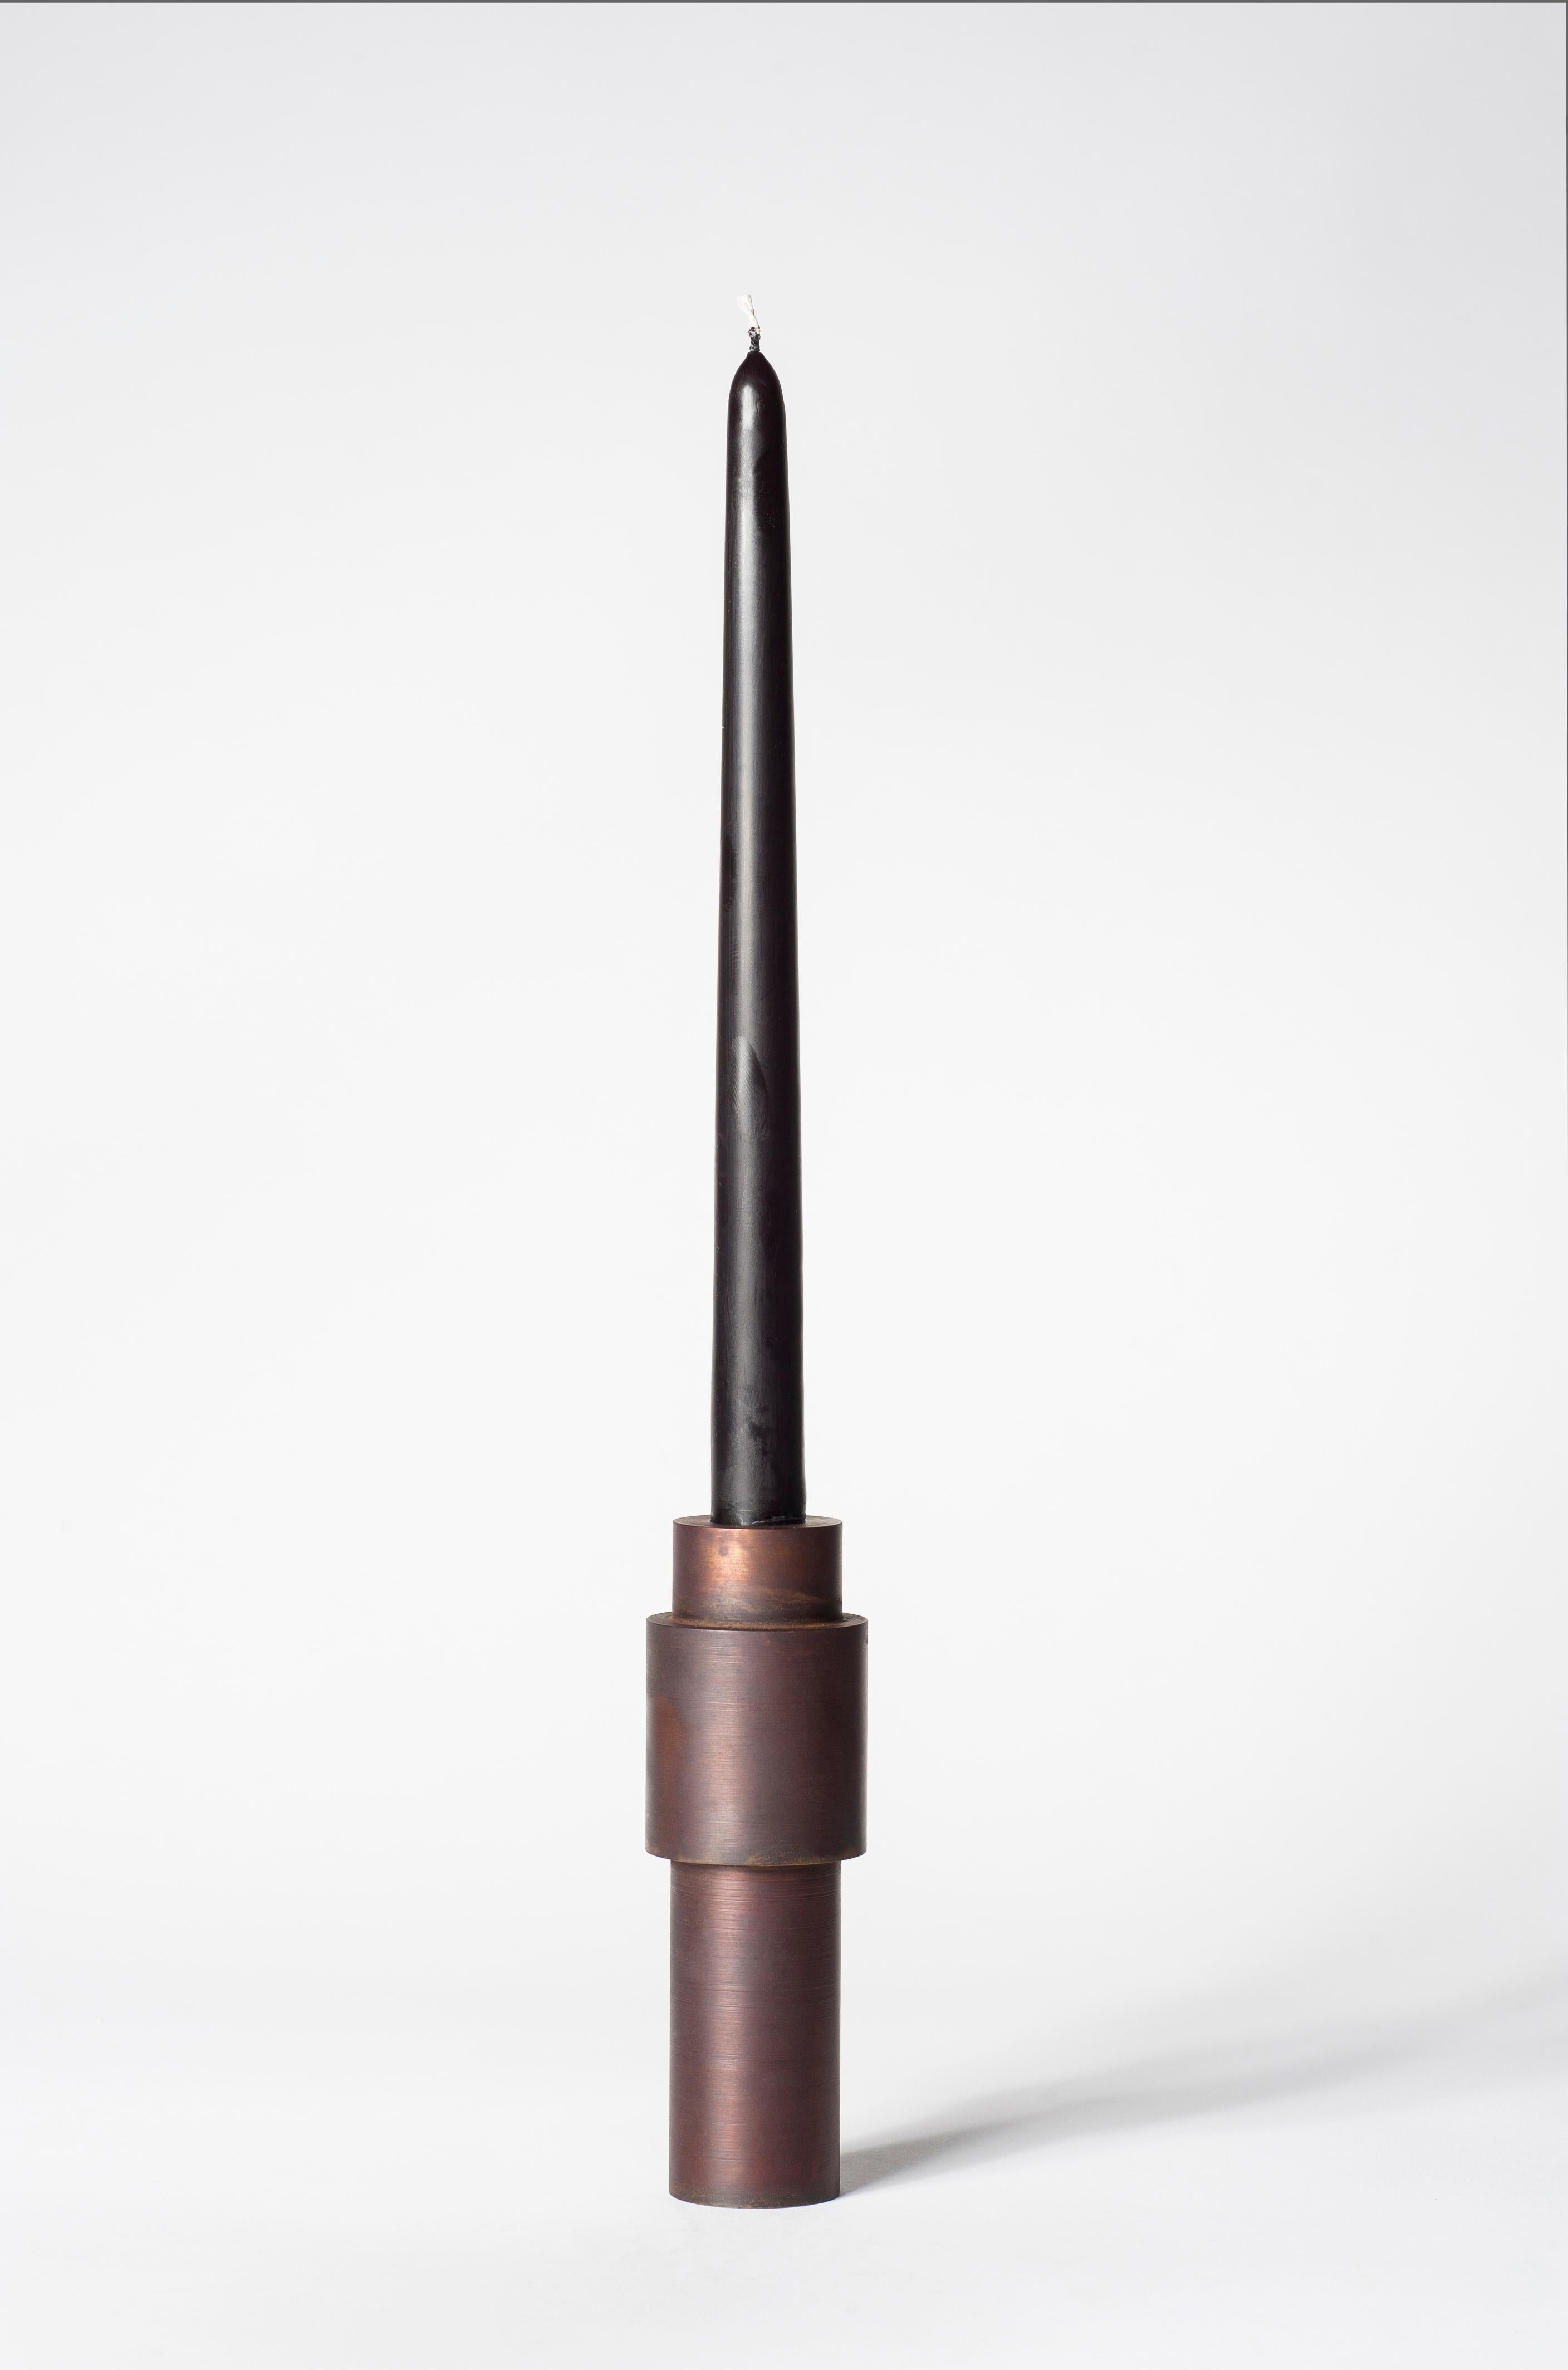 Brown patina steel candlestick by Lukasz Friedrich.
Dimensions: D 5 x H 15 cm.
Materials: Brown patina on steel.